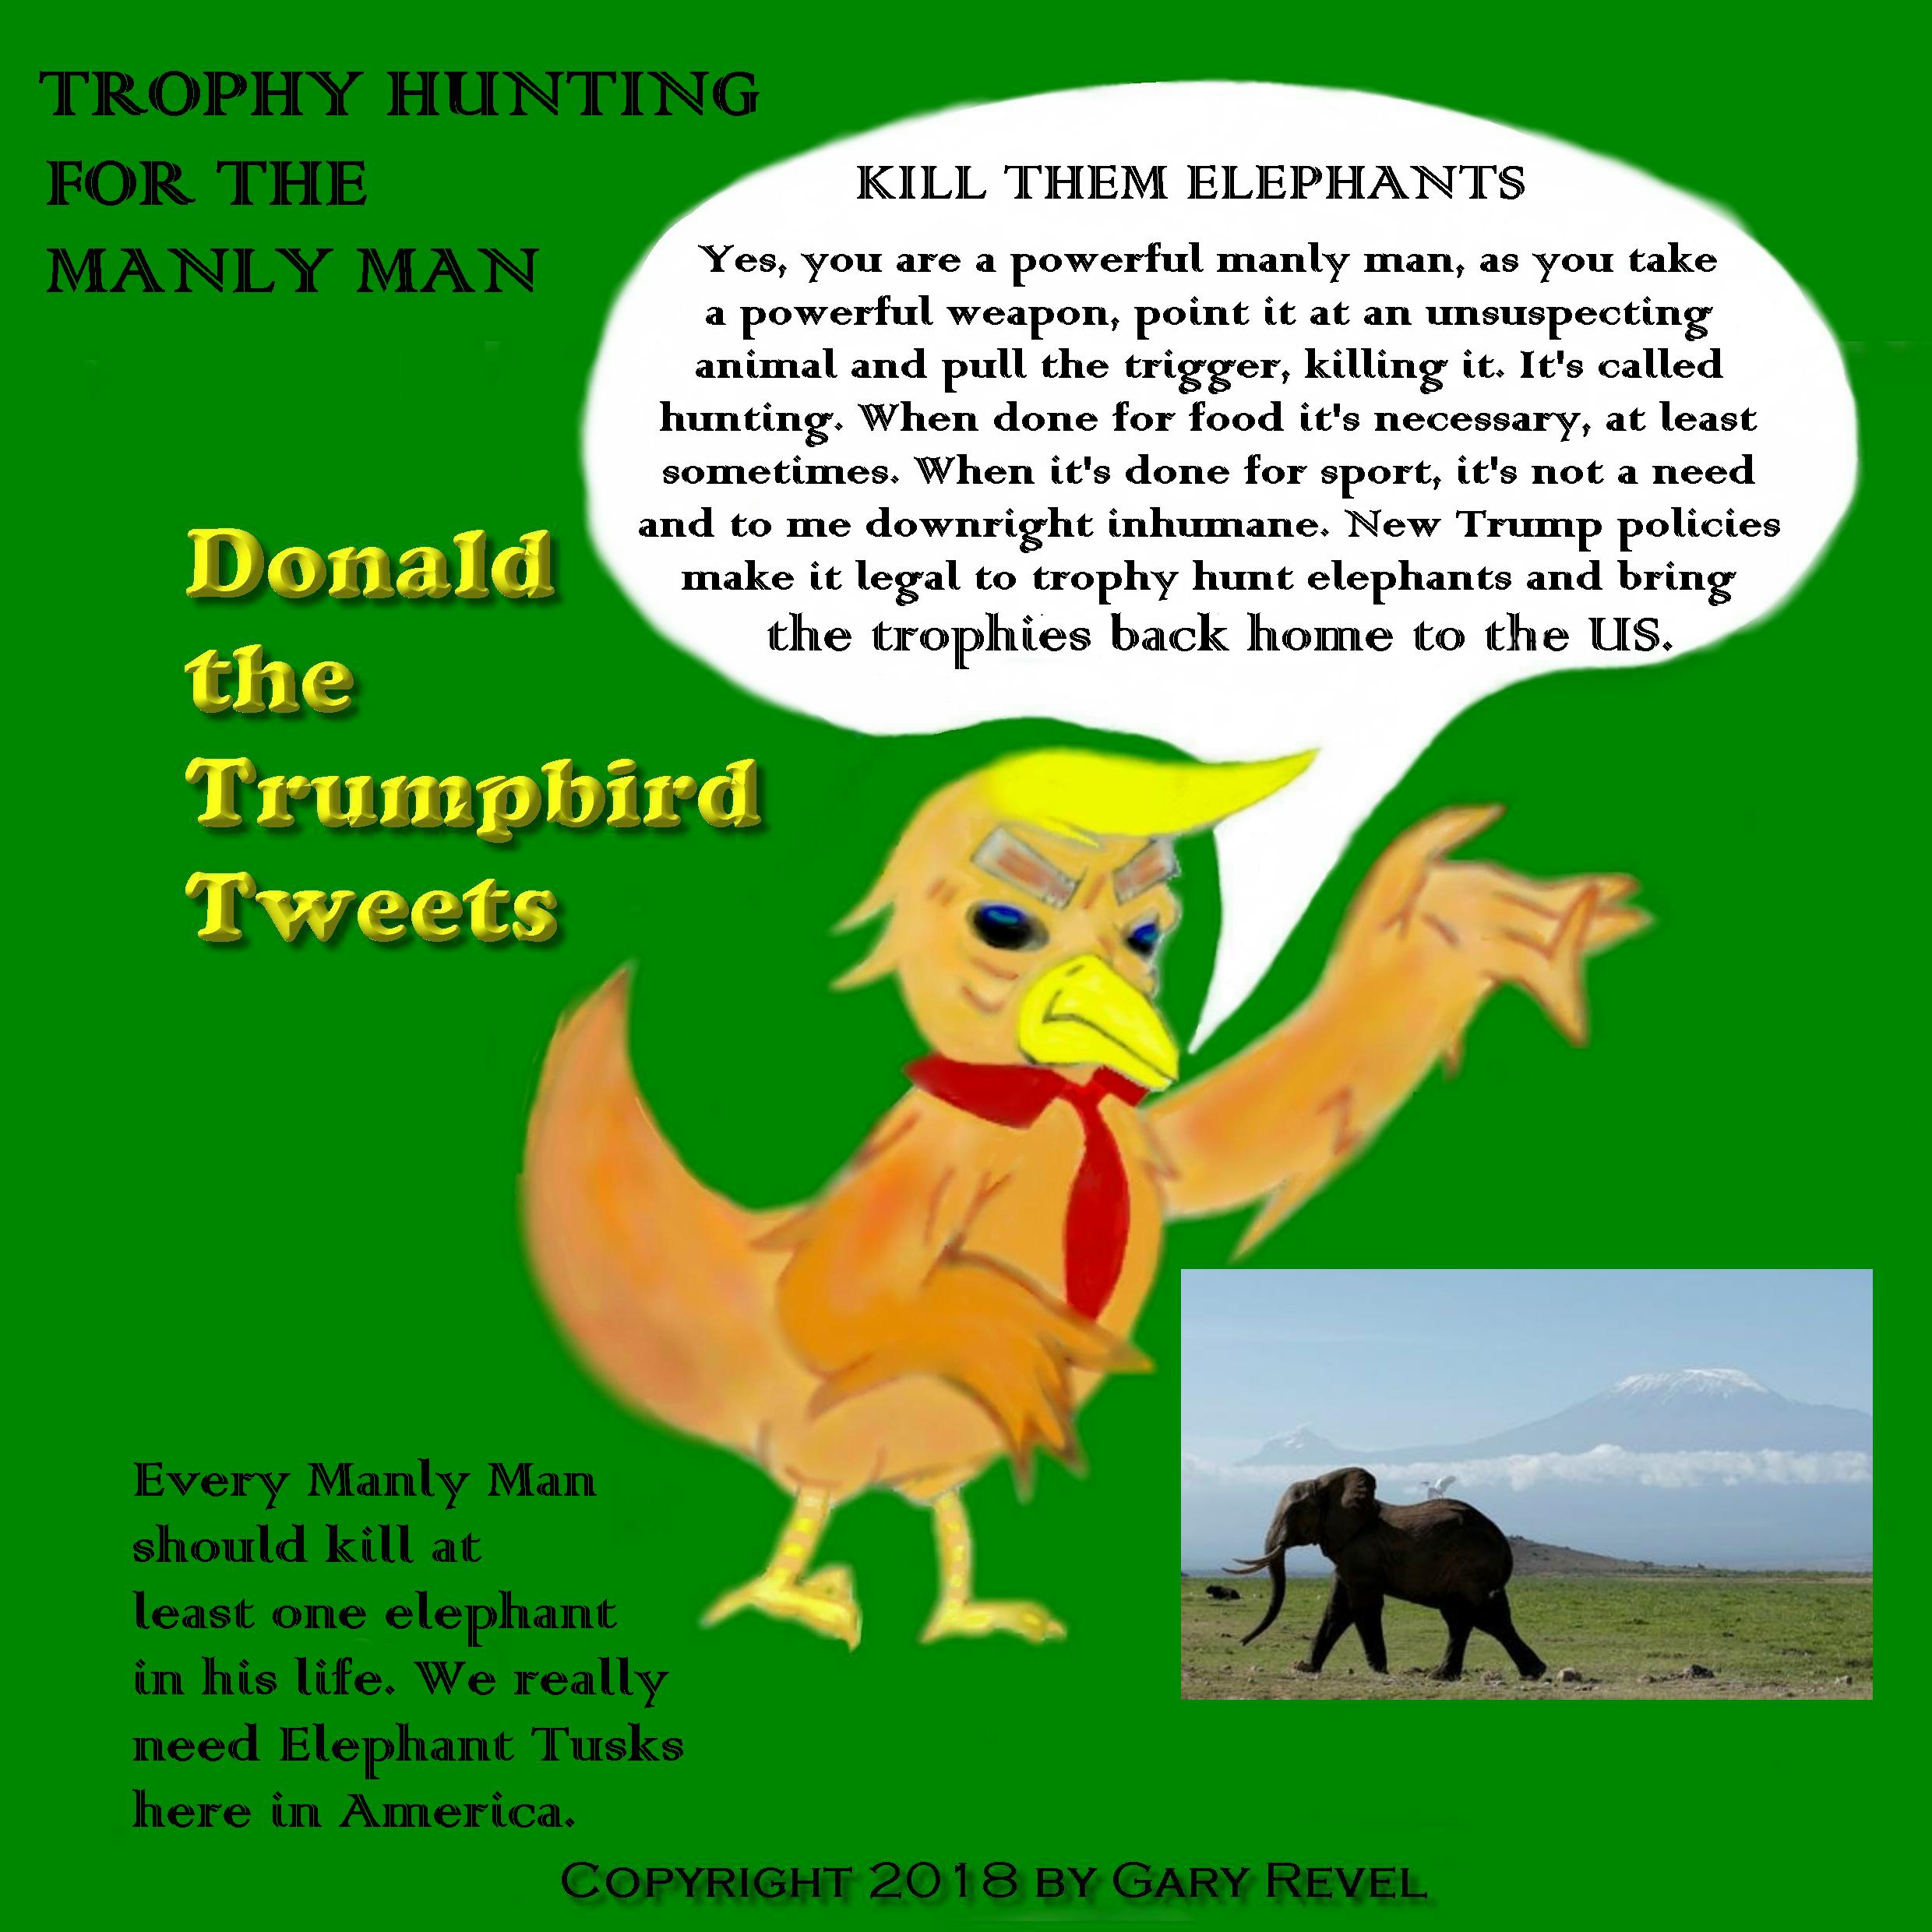 Donald the Trumpbird tweets Lady Liberty is Crying